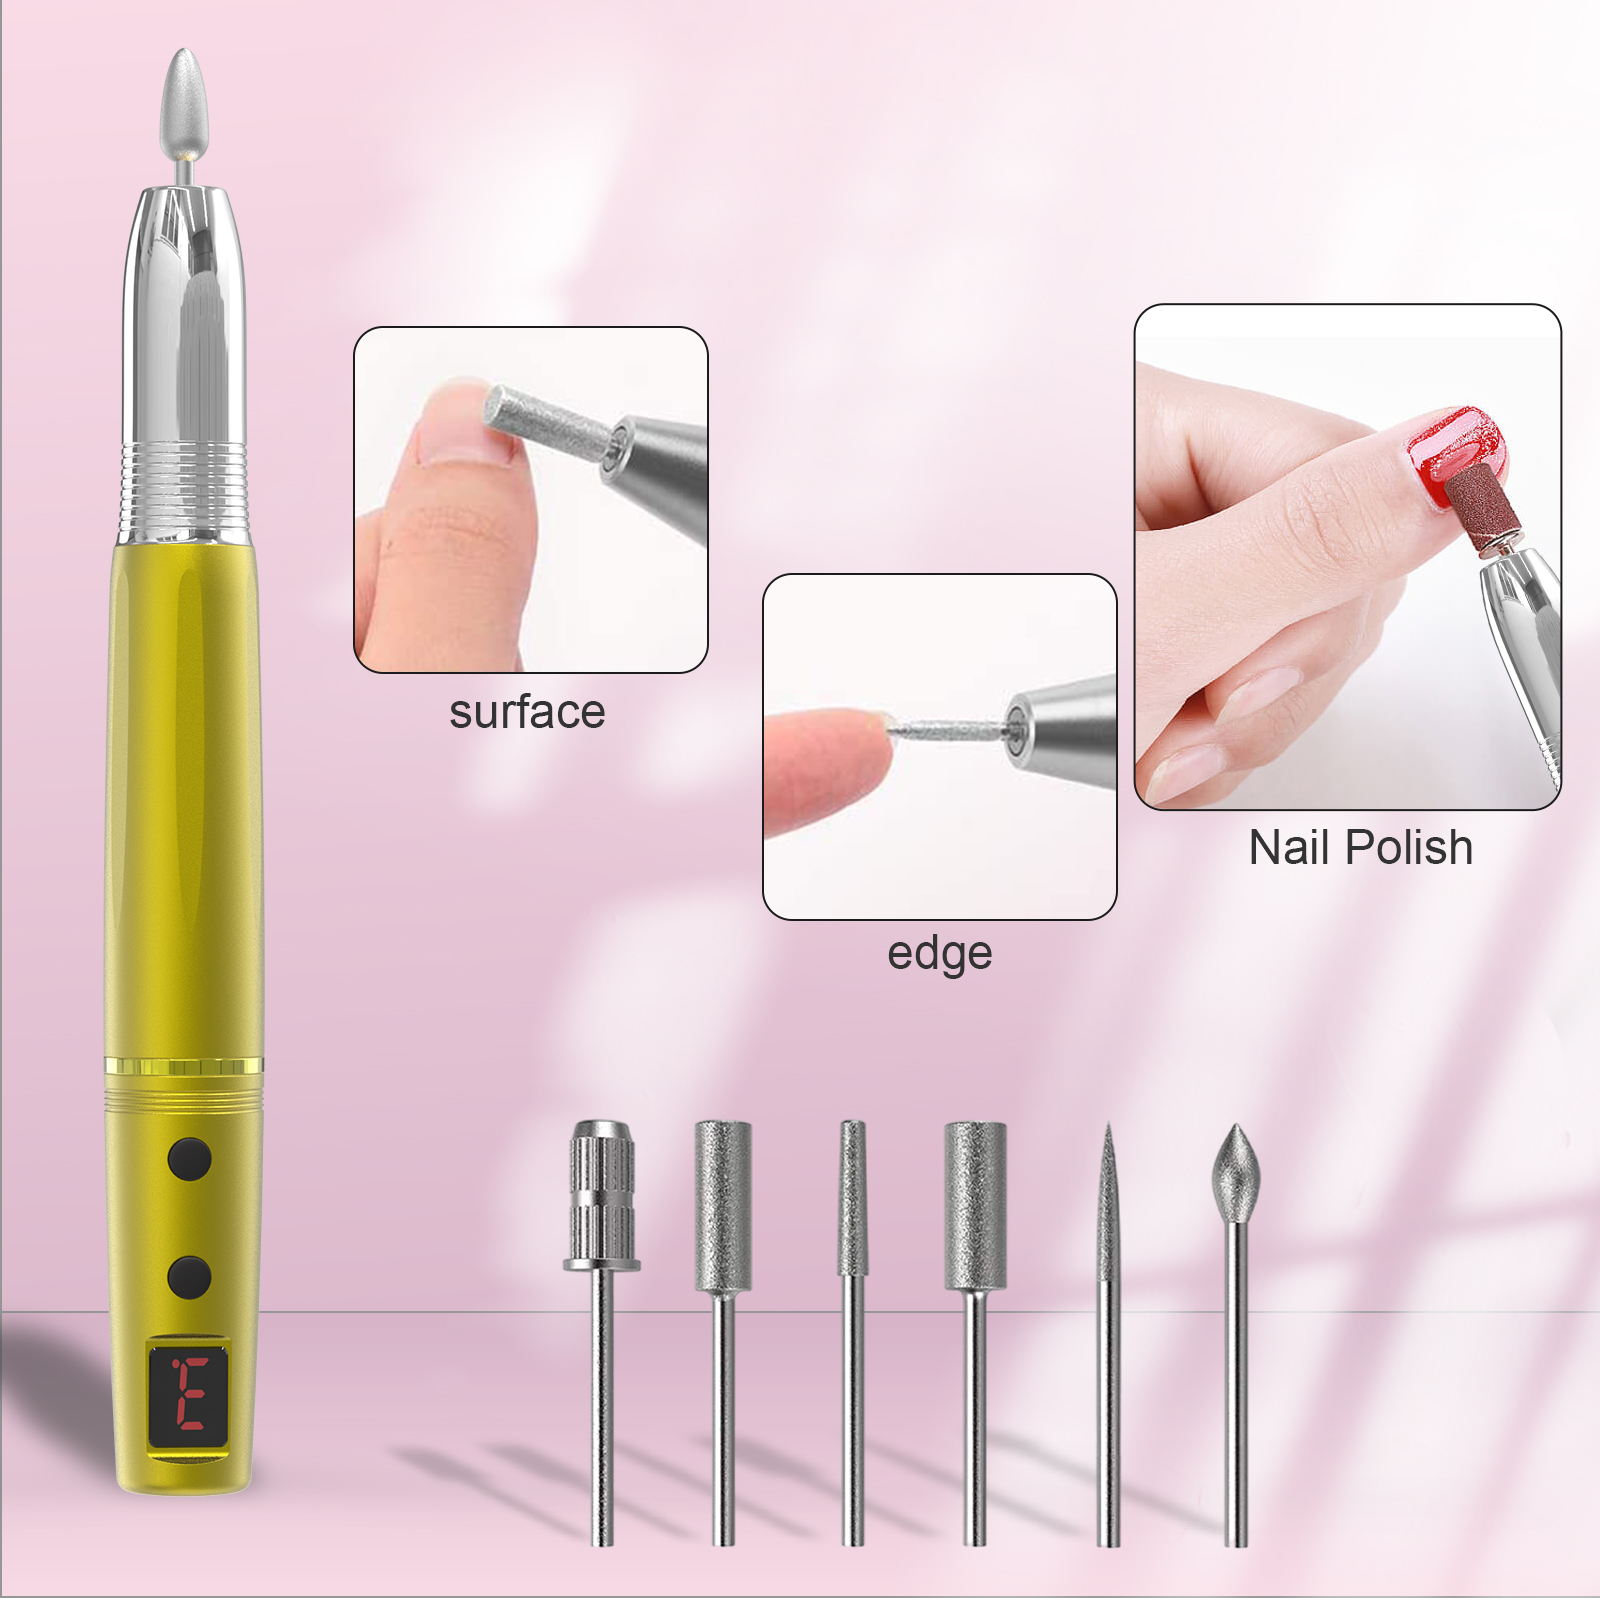 New Portable Cordless electric nail drill 15000 rpm wireless charging electric pedicure foot file Manufacturers, New Portable Cordless electric nail drill 15000 rpm wireless charging electric pedicure foot file Factory, Supply New Portable Cordless electric nail drill 15000 rpm wireless charging electric pedicure foot file